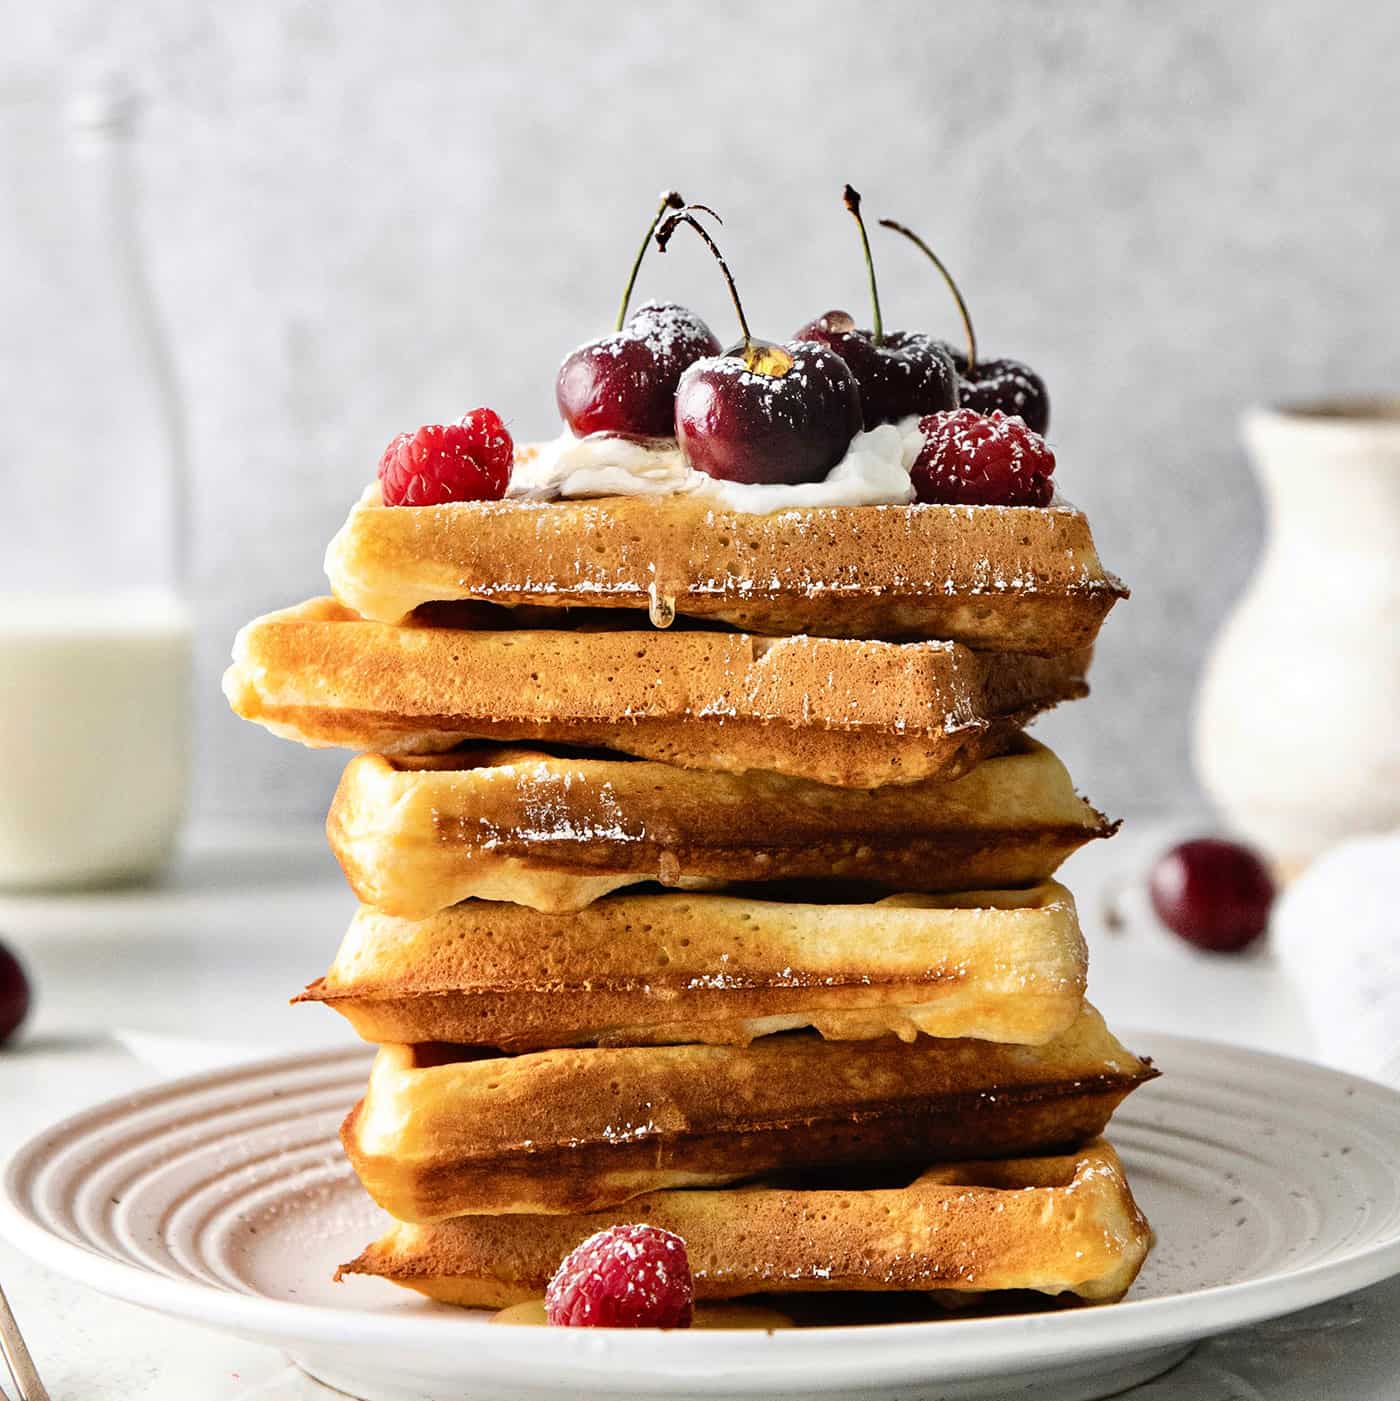 A stack of homemade waffles topped with cherries